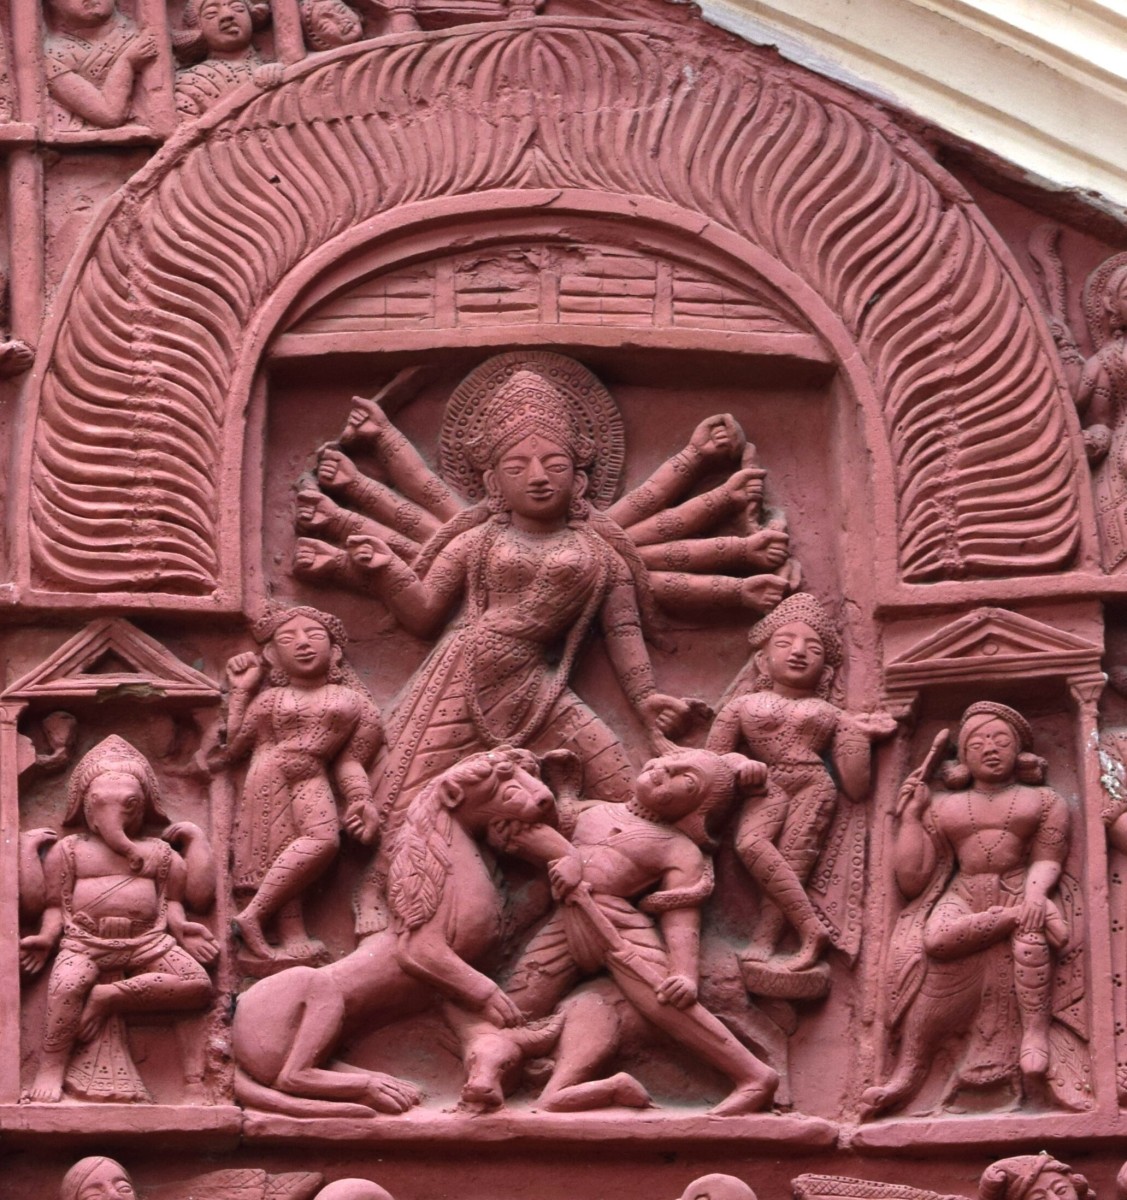 Different forms of Durga, the Mother Goddess in temple decorations of West Bengal, India